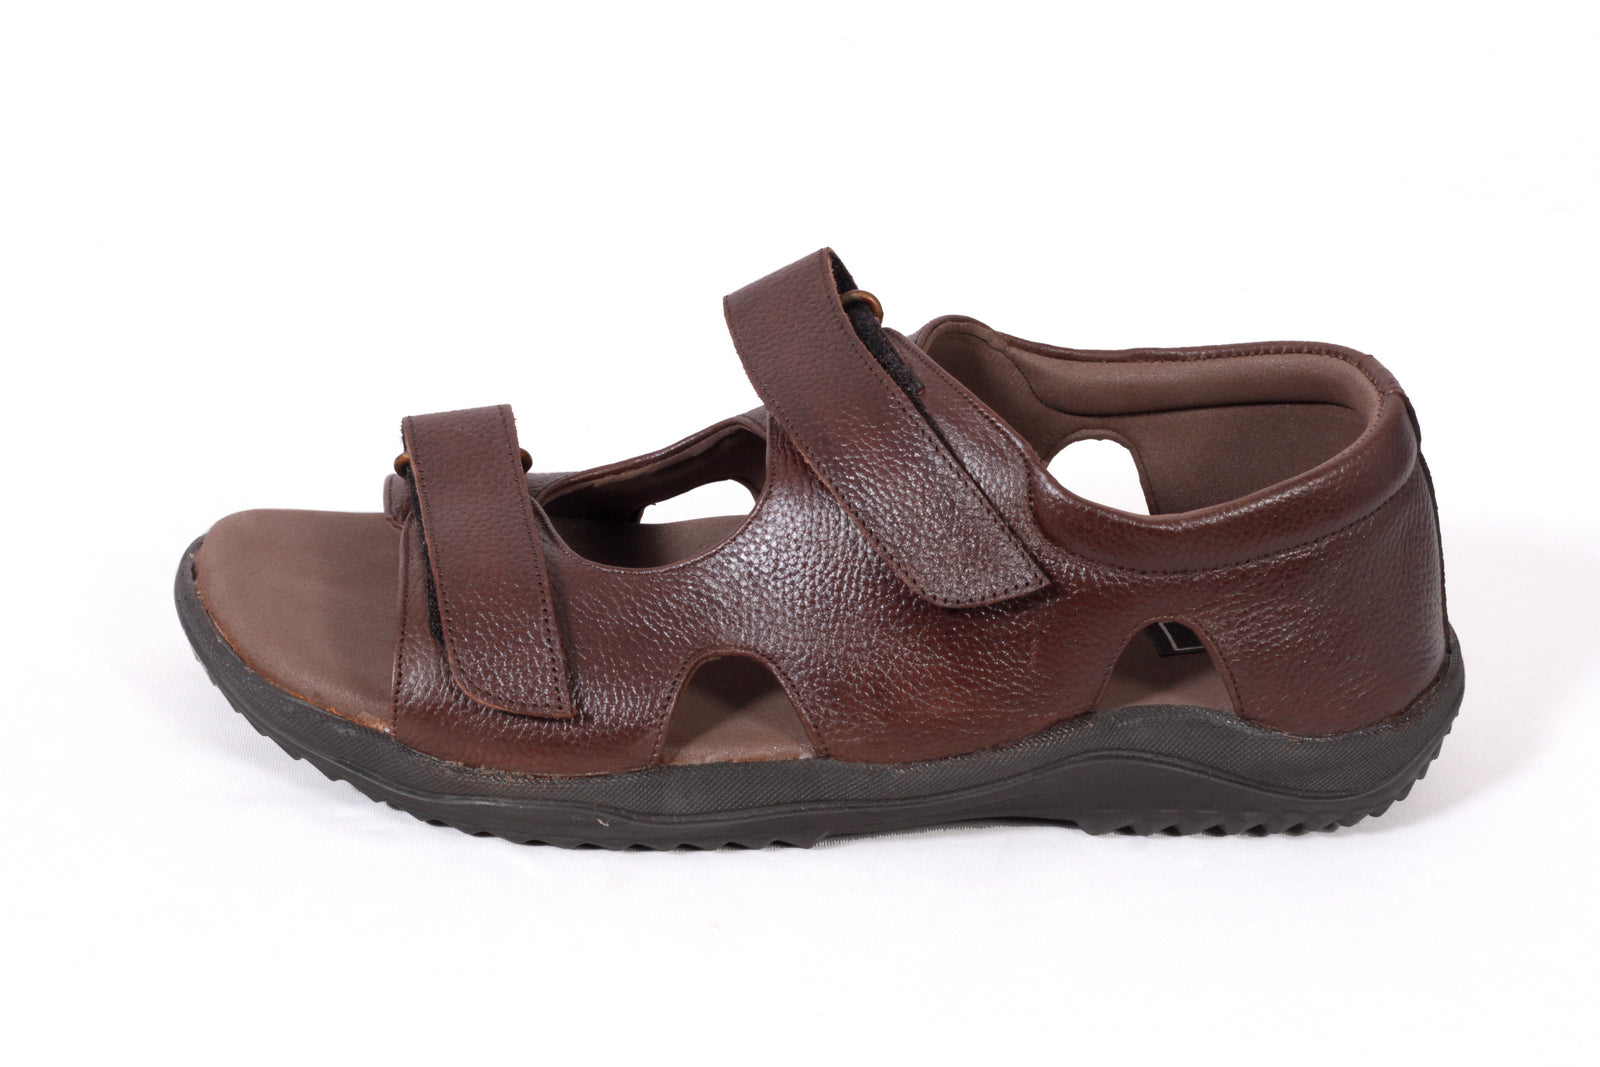 Brutus Red Sandals for Women - Fall/Winter collection - Camper USA